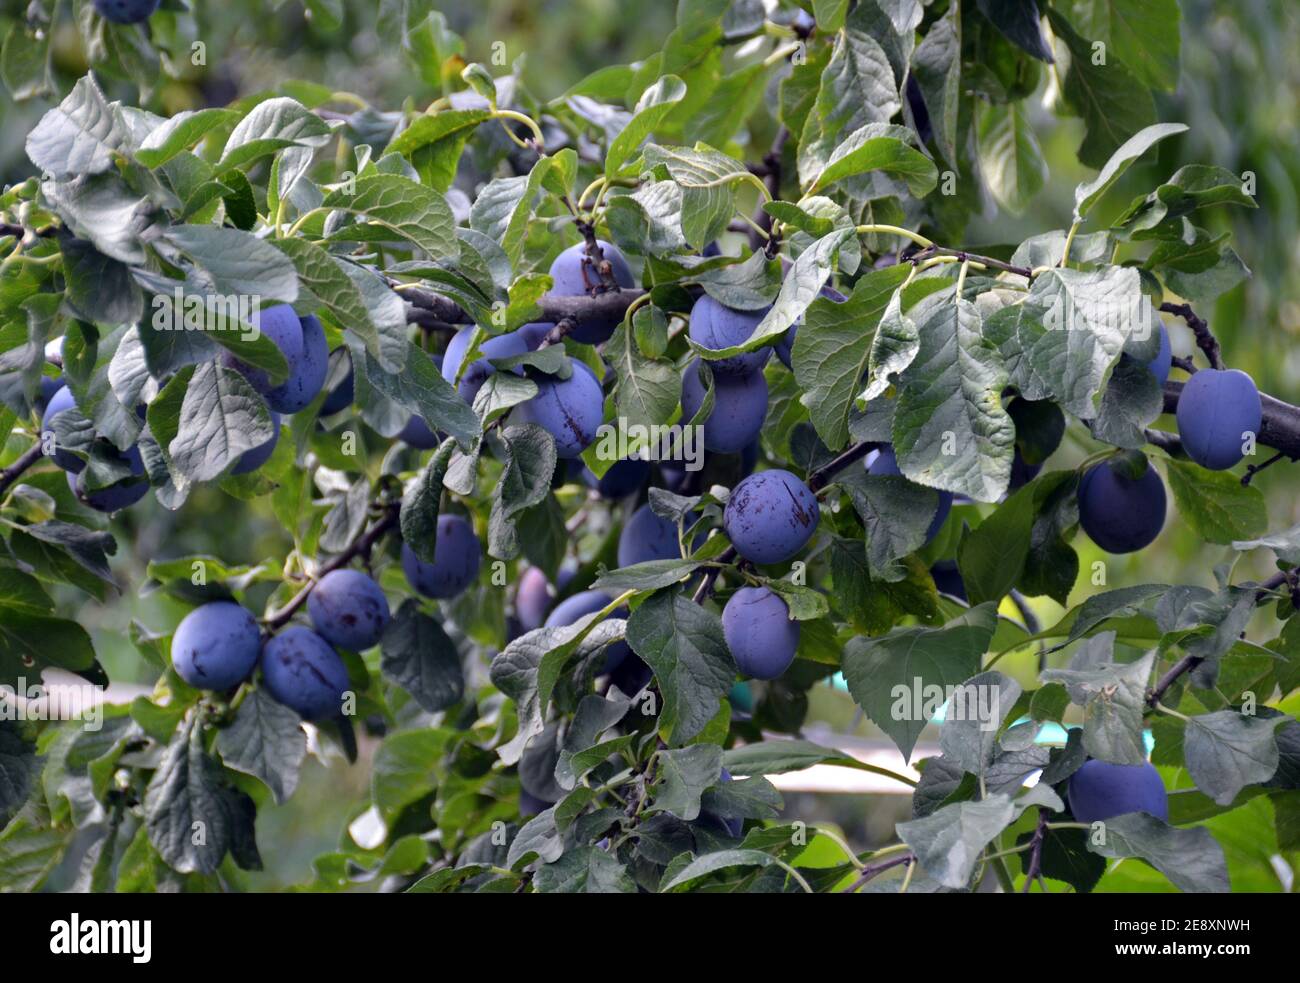 Ripe Plums Are Hanging In A Plum Tree Stock Photo